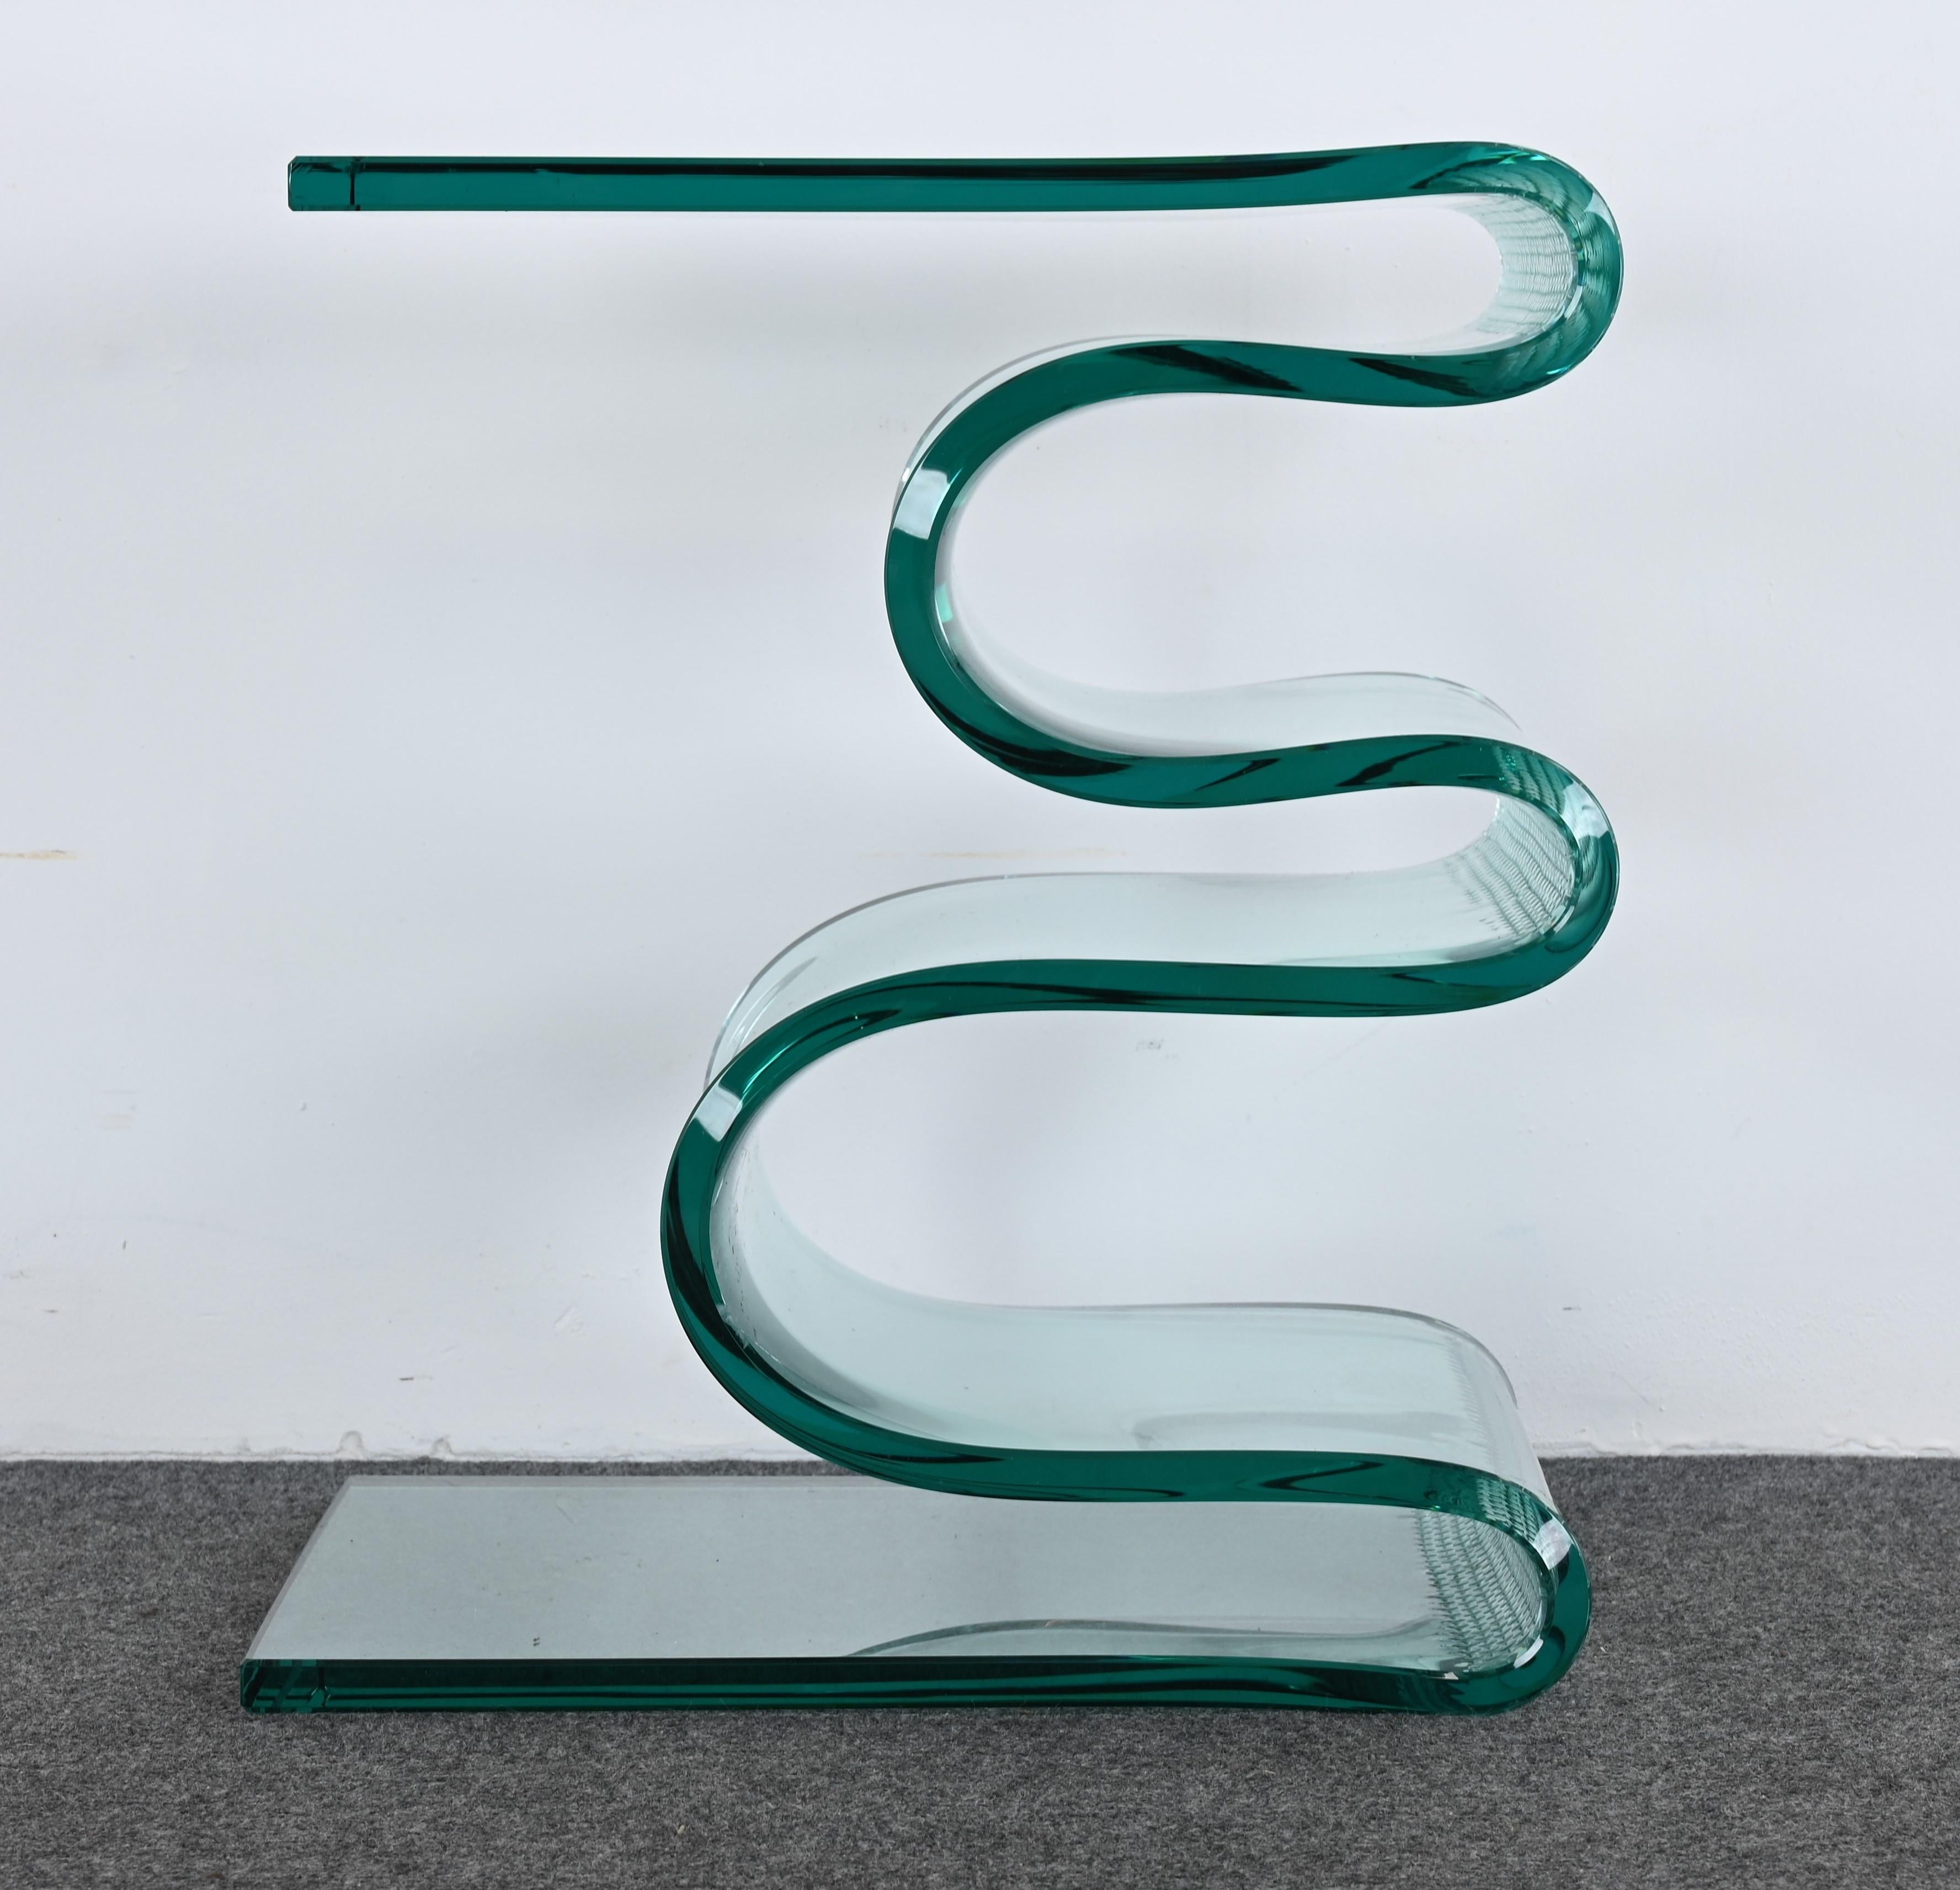 A fantastic handmade Zig Zag table designed by Laurel Fyfe. This handmade table was sold in galleries and retail stores across the United States. The unique side table was formed with steel cable while the glass was near a liquid state. This